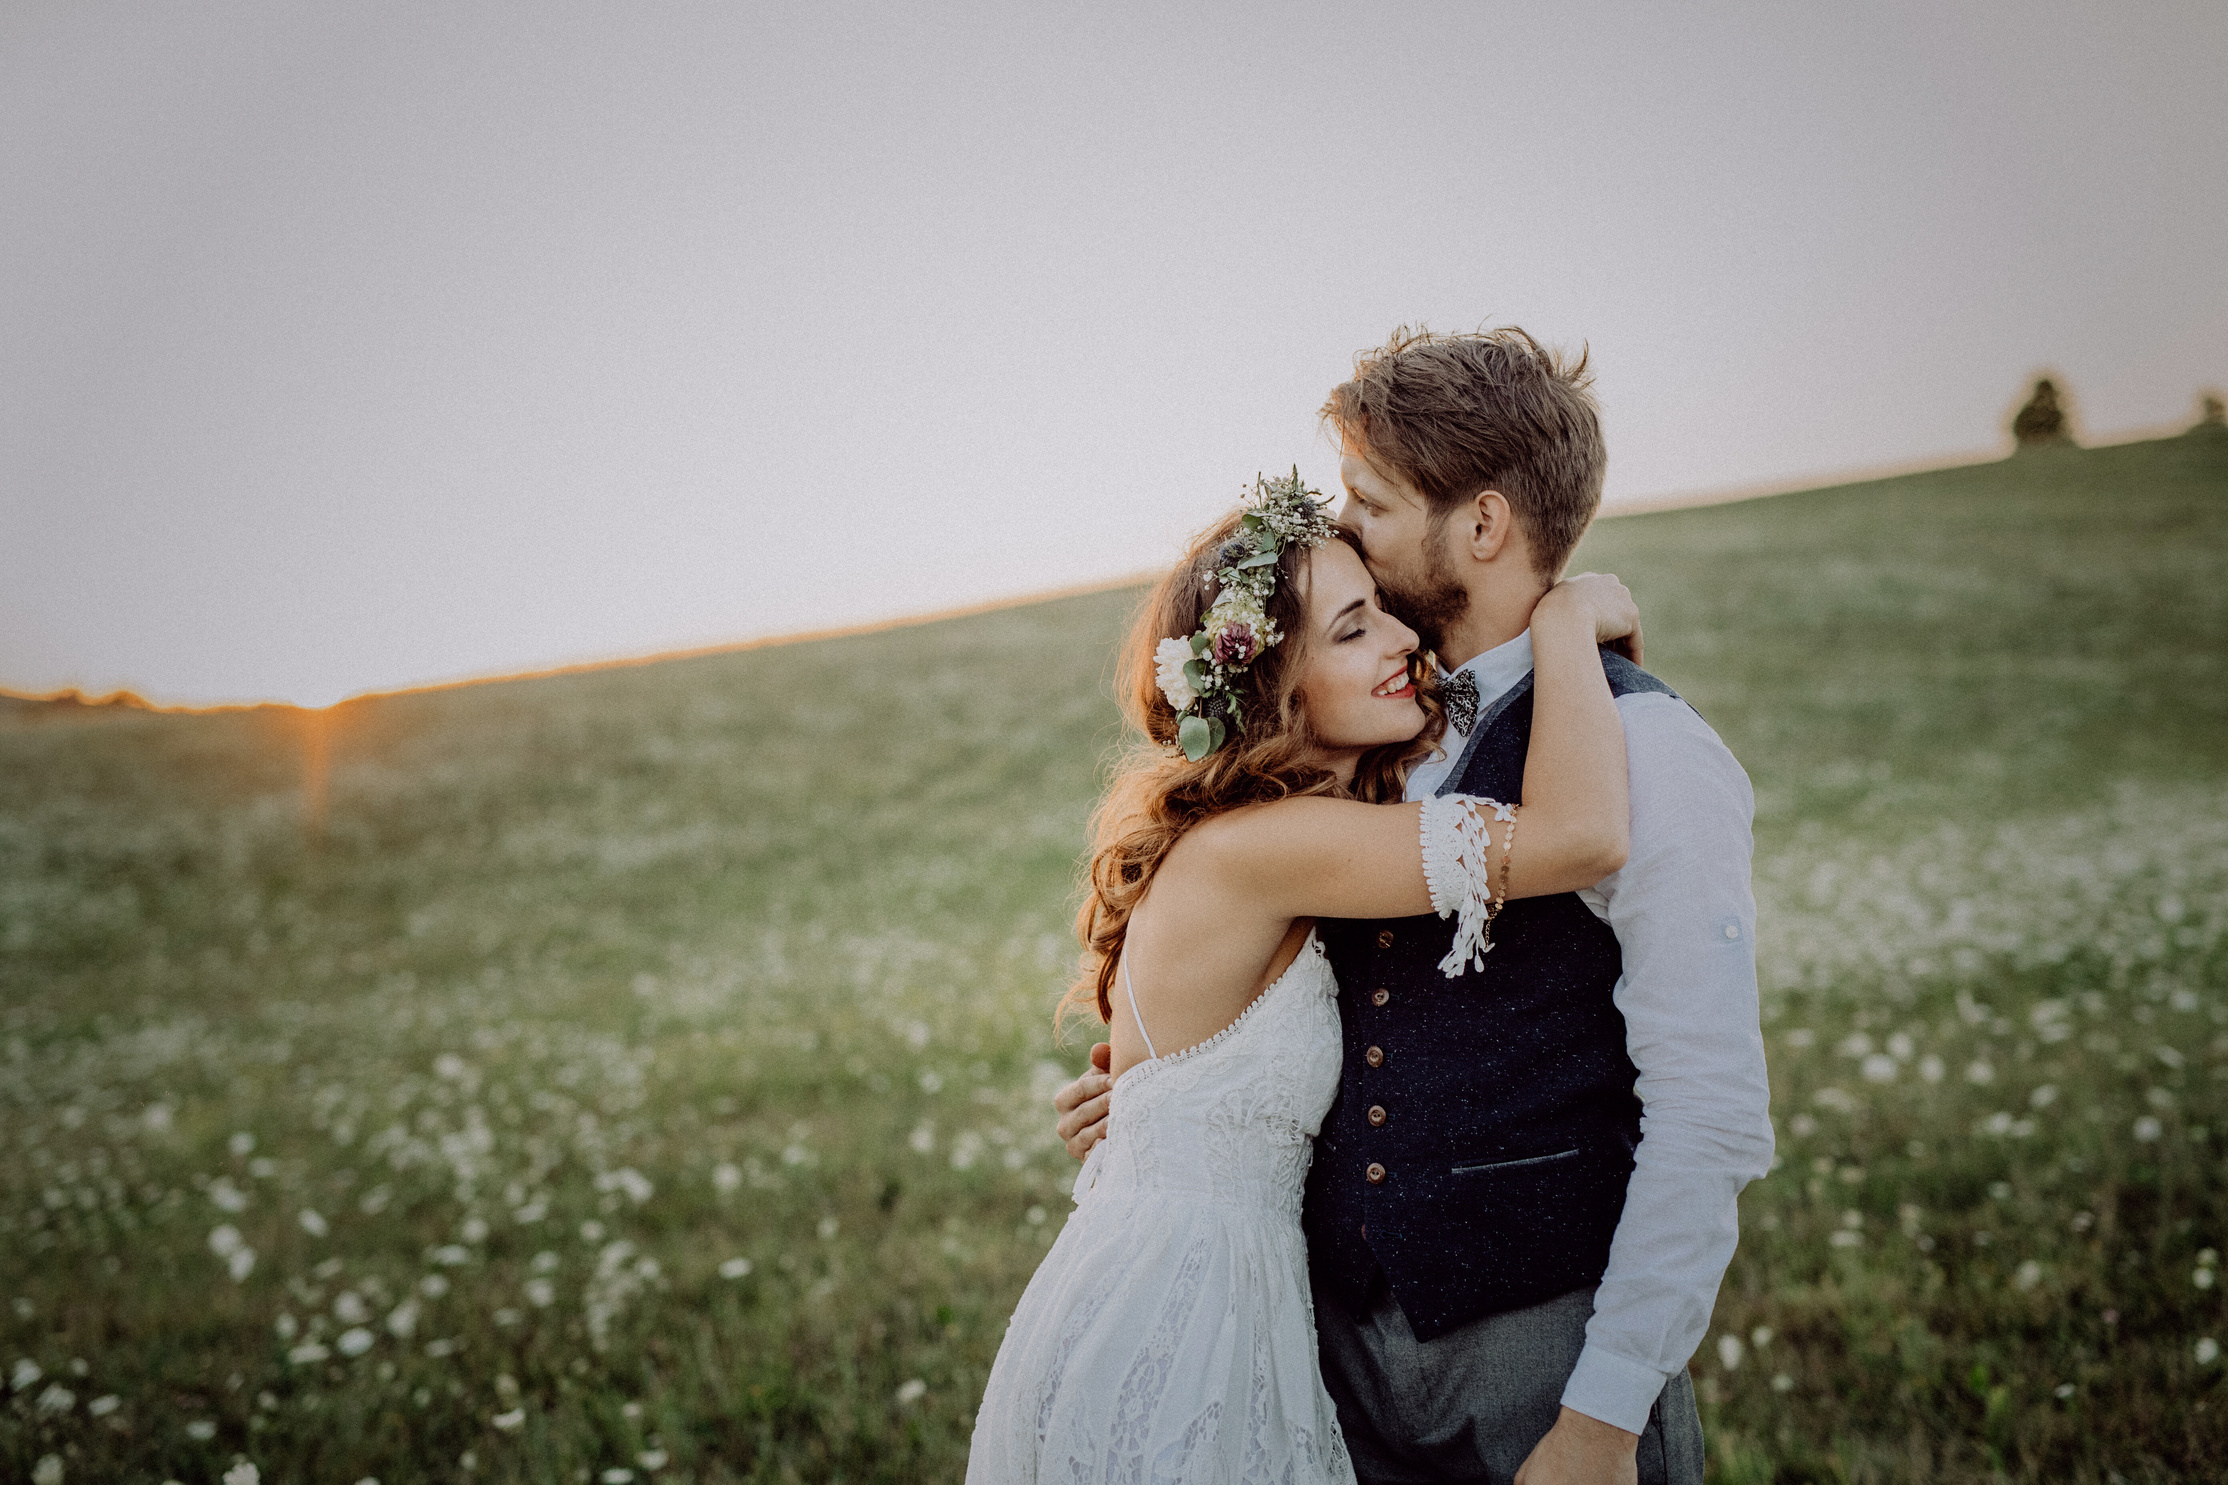 Bride and groom kissing in a field of wildflowers at sunset.  